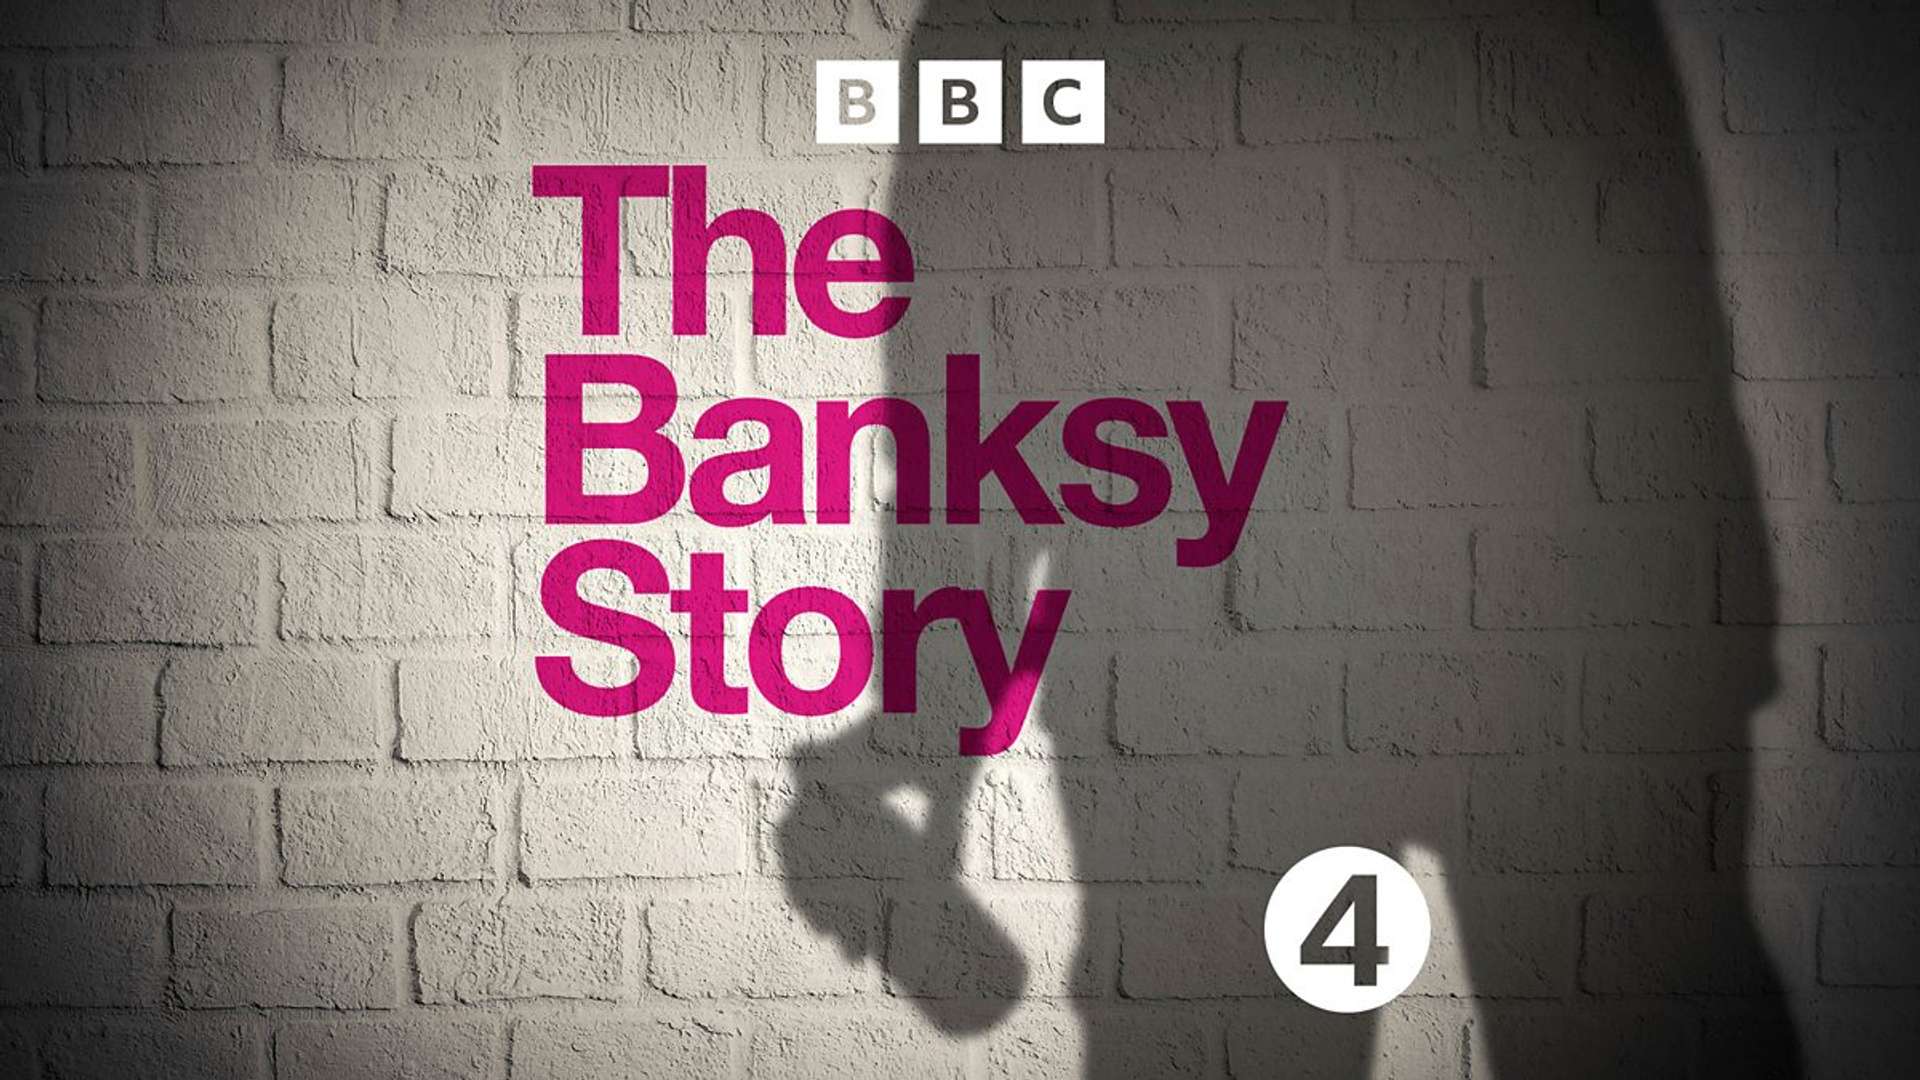 Promotional advert image for BBC Radio 4's The Banksy Story Podcast. The title of the podcast is written in large pink, over a white brick wall with a shadow figure holding a spray paint can.